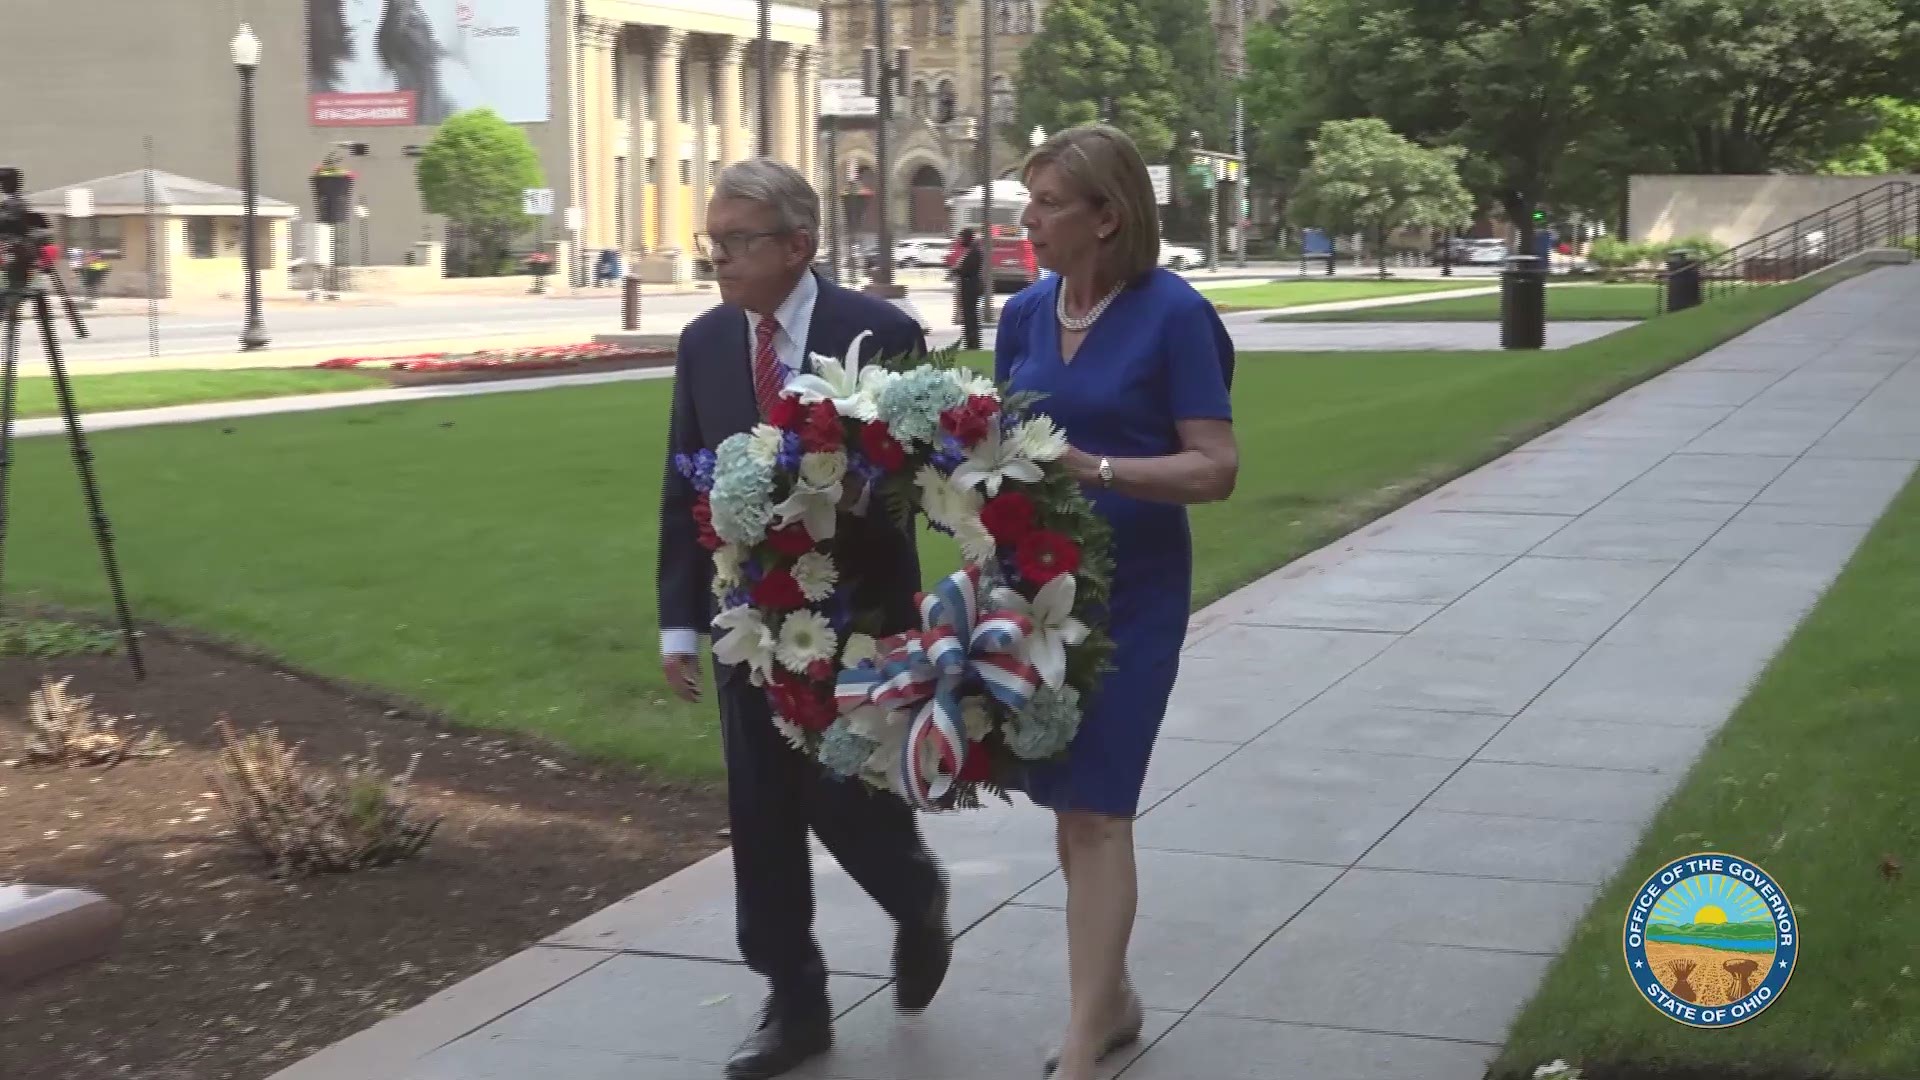 In advance of Memorial Day, Mike DeWine and First Lady Fran DeWine held a private wreath-laying ceremony in honor of the Ohio service members who gave their lives.